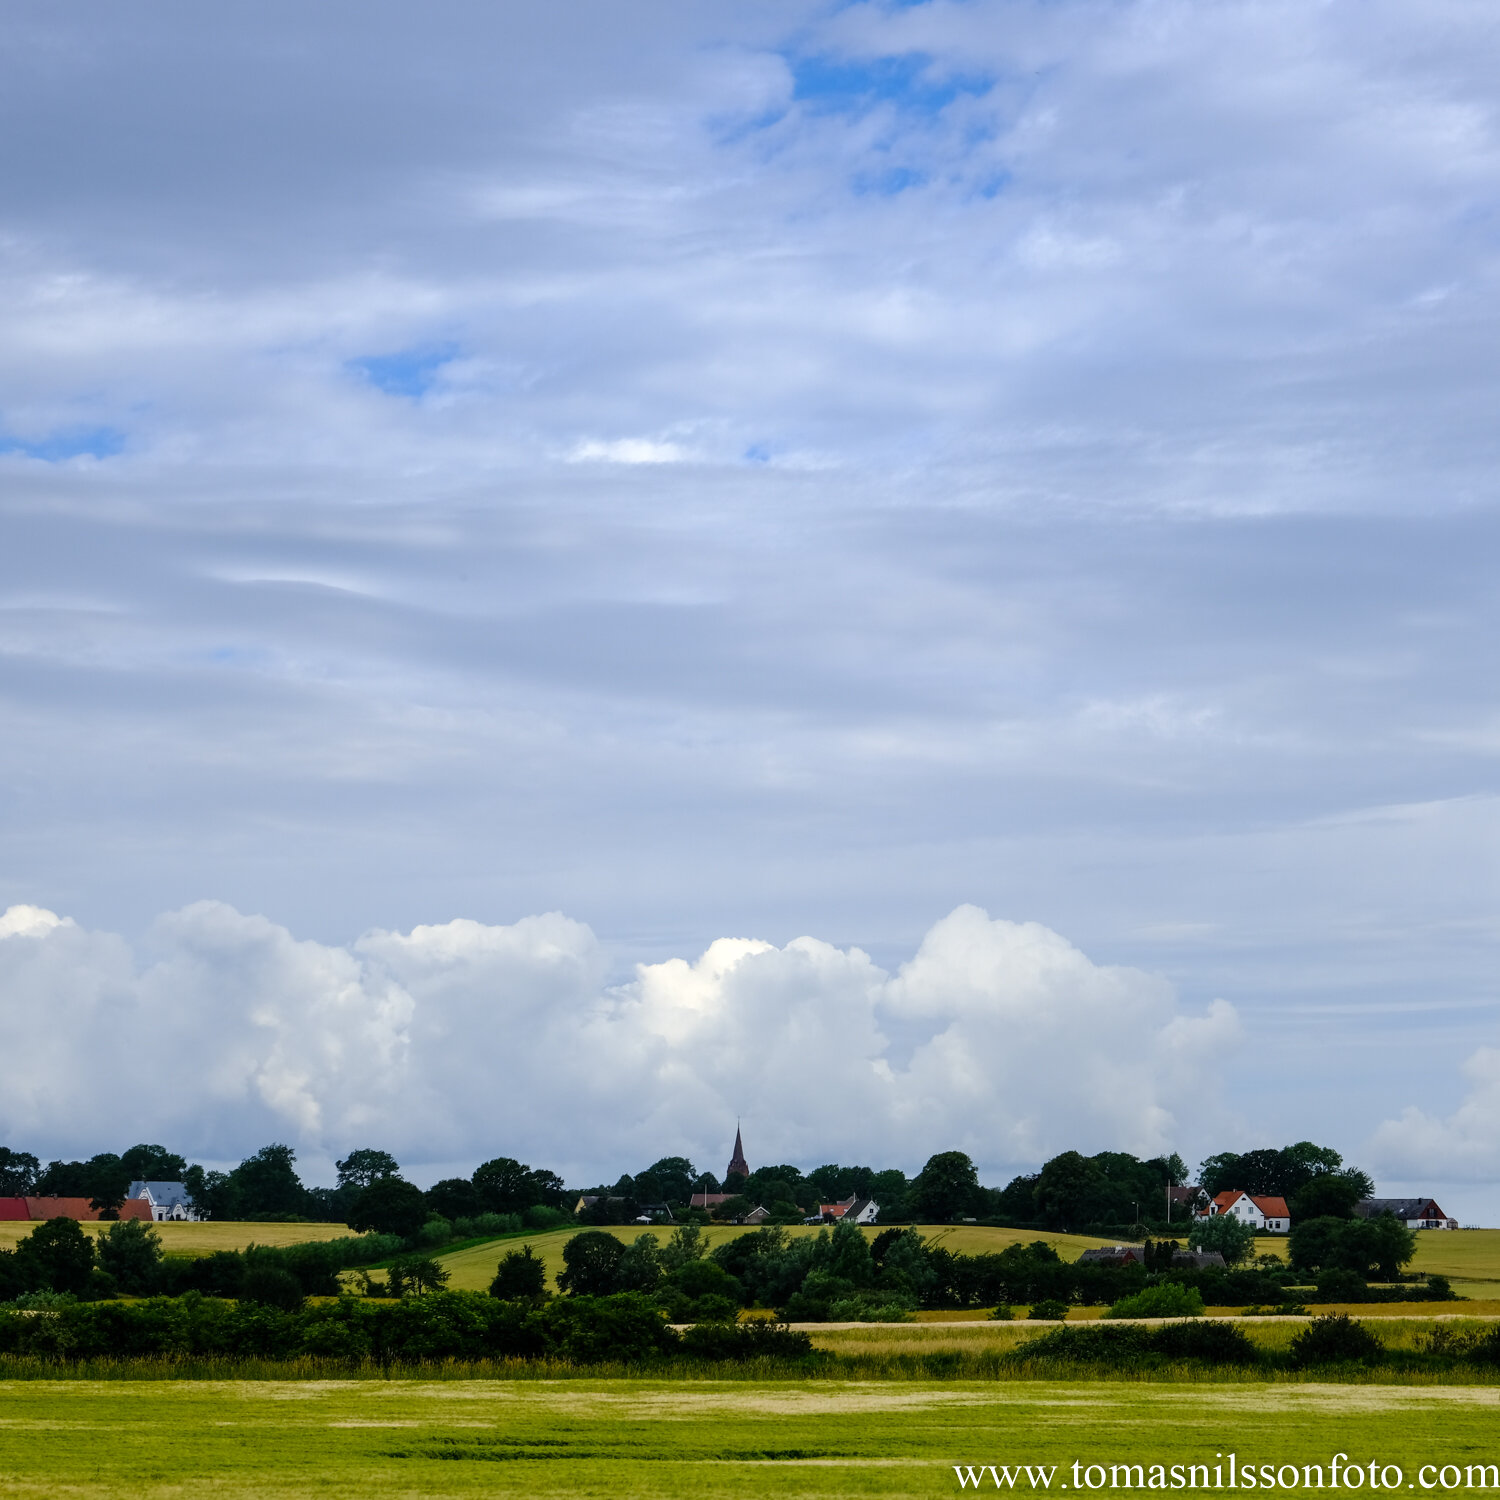 Day 194 - July 12: Big skies over Ven